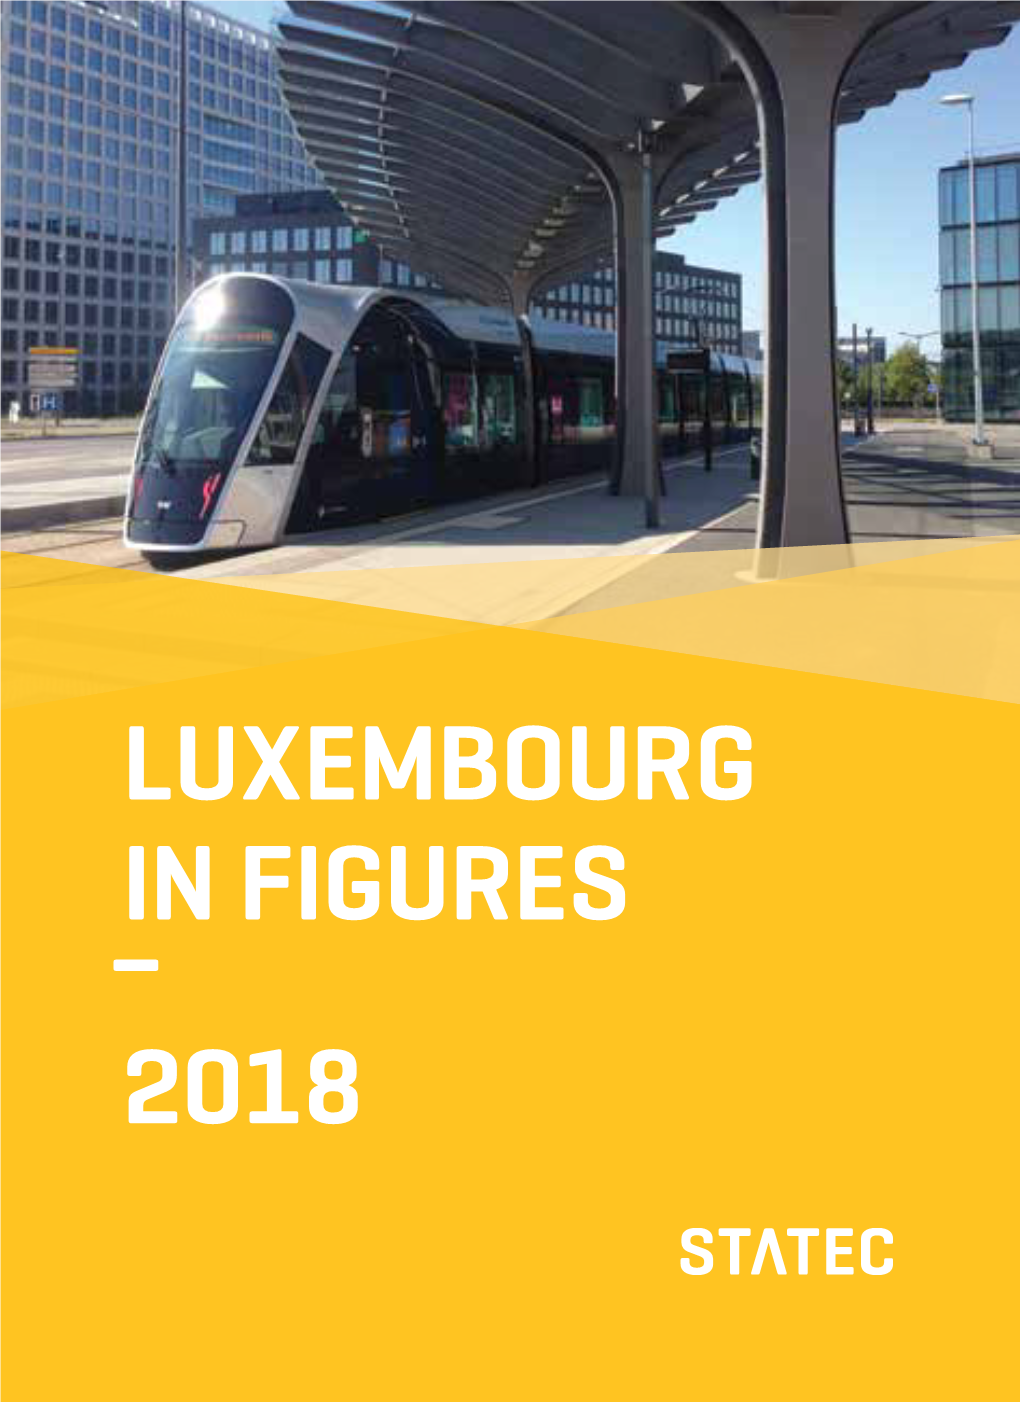 Luxembourg in Figures – 2018 Contents